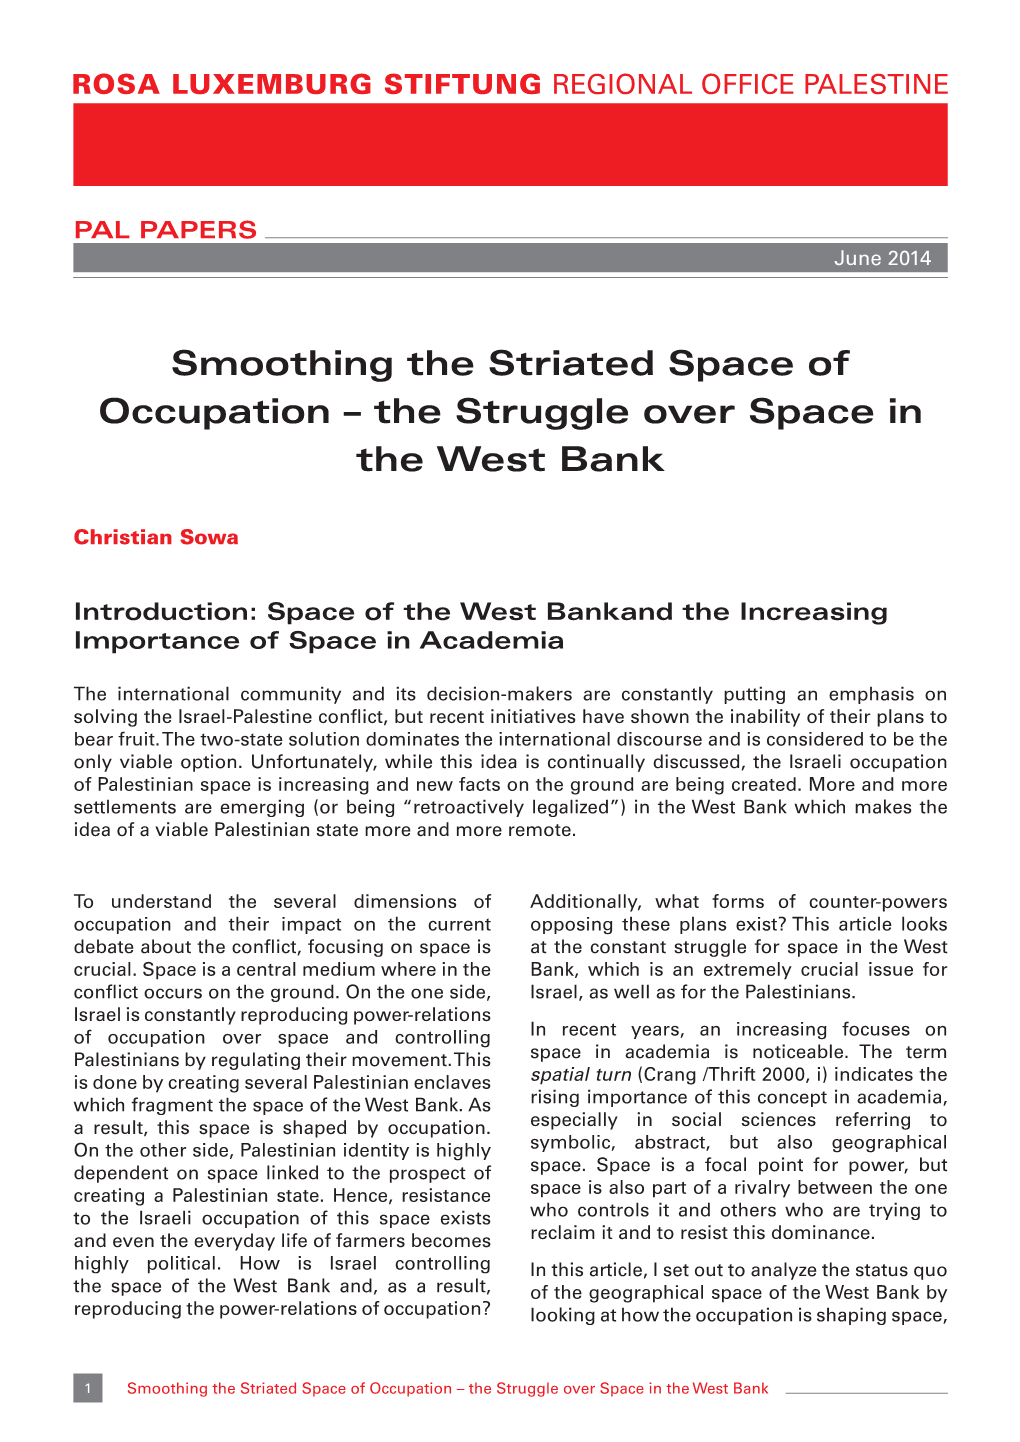 Smoothing the Striated Space of Occupation – the Struggle Over Space in the West Bank